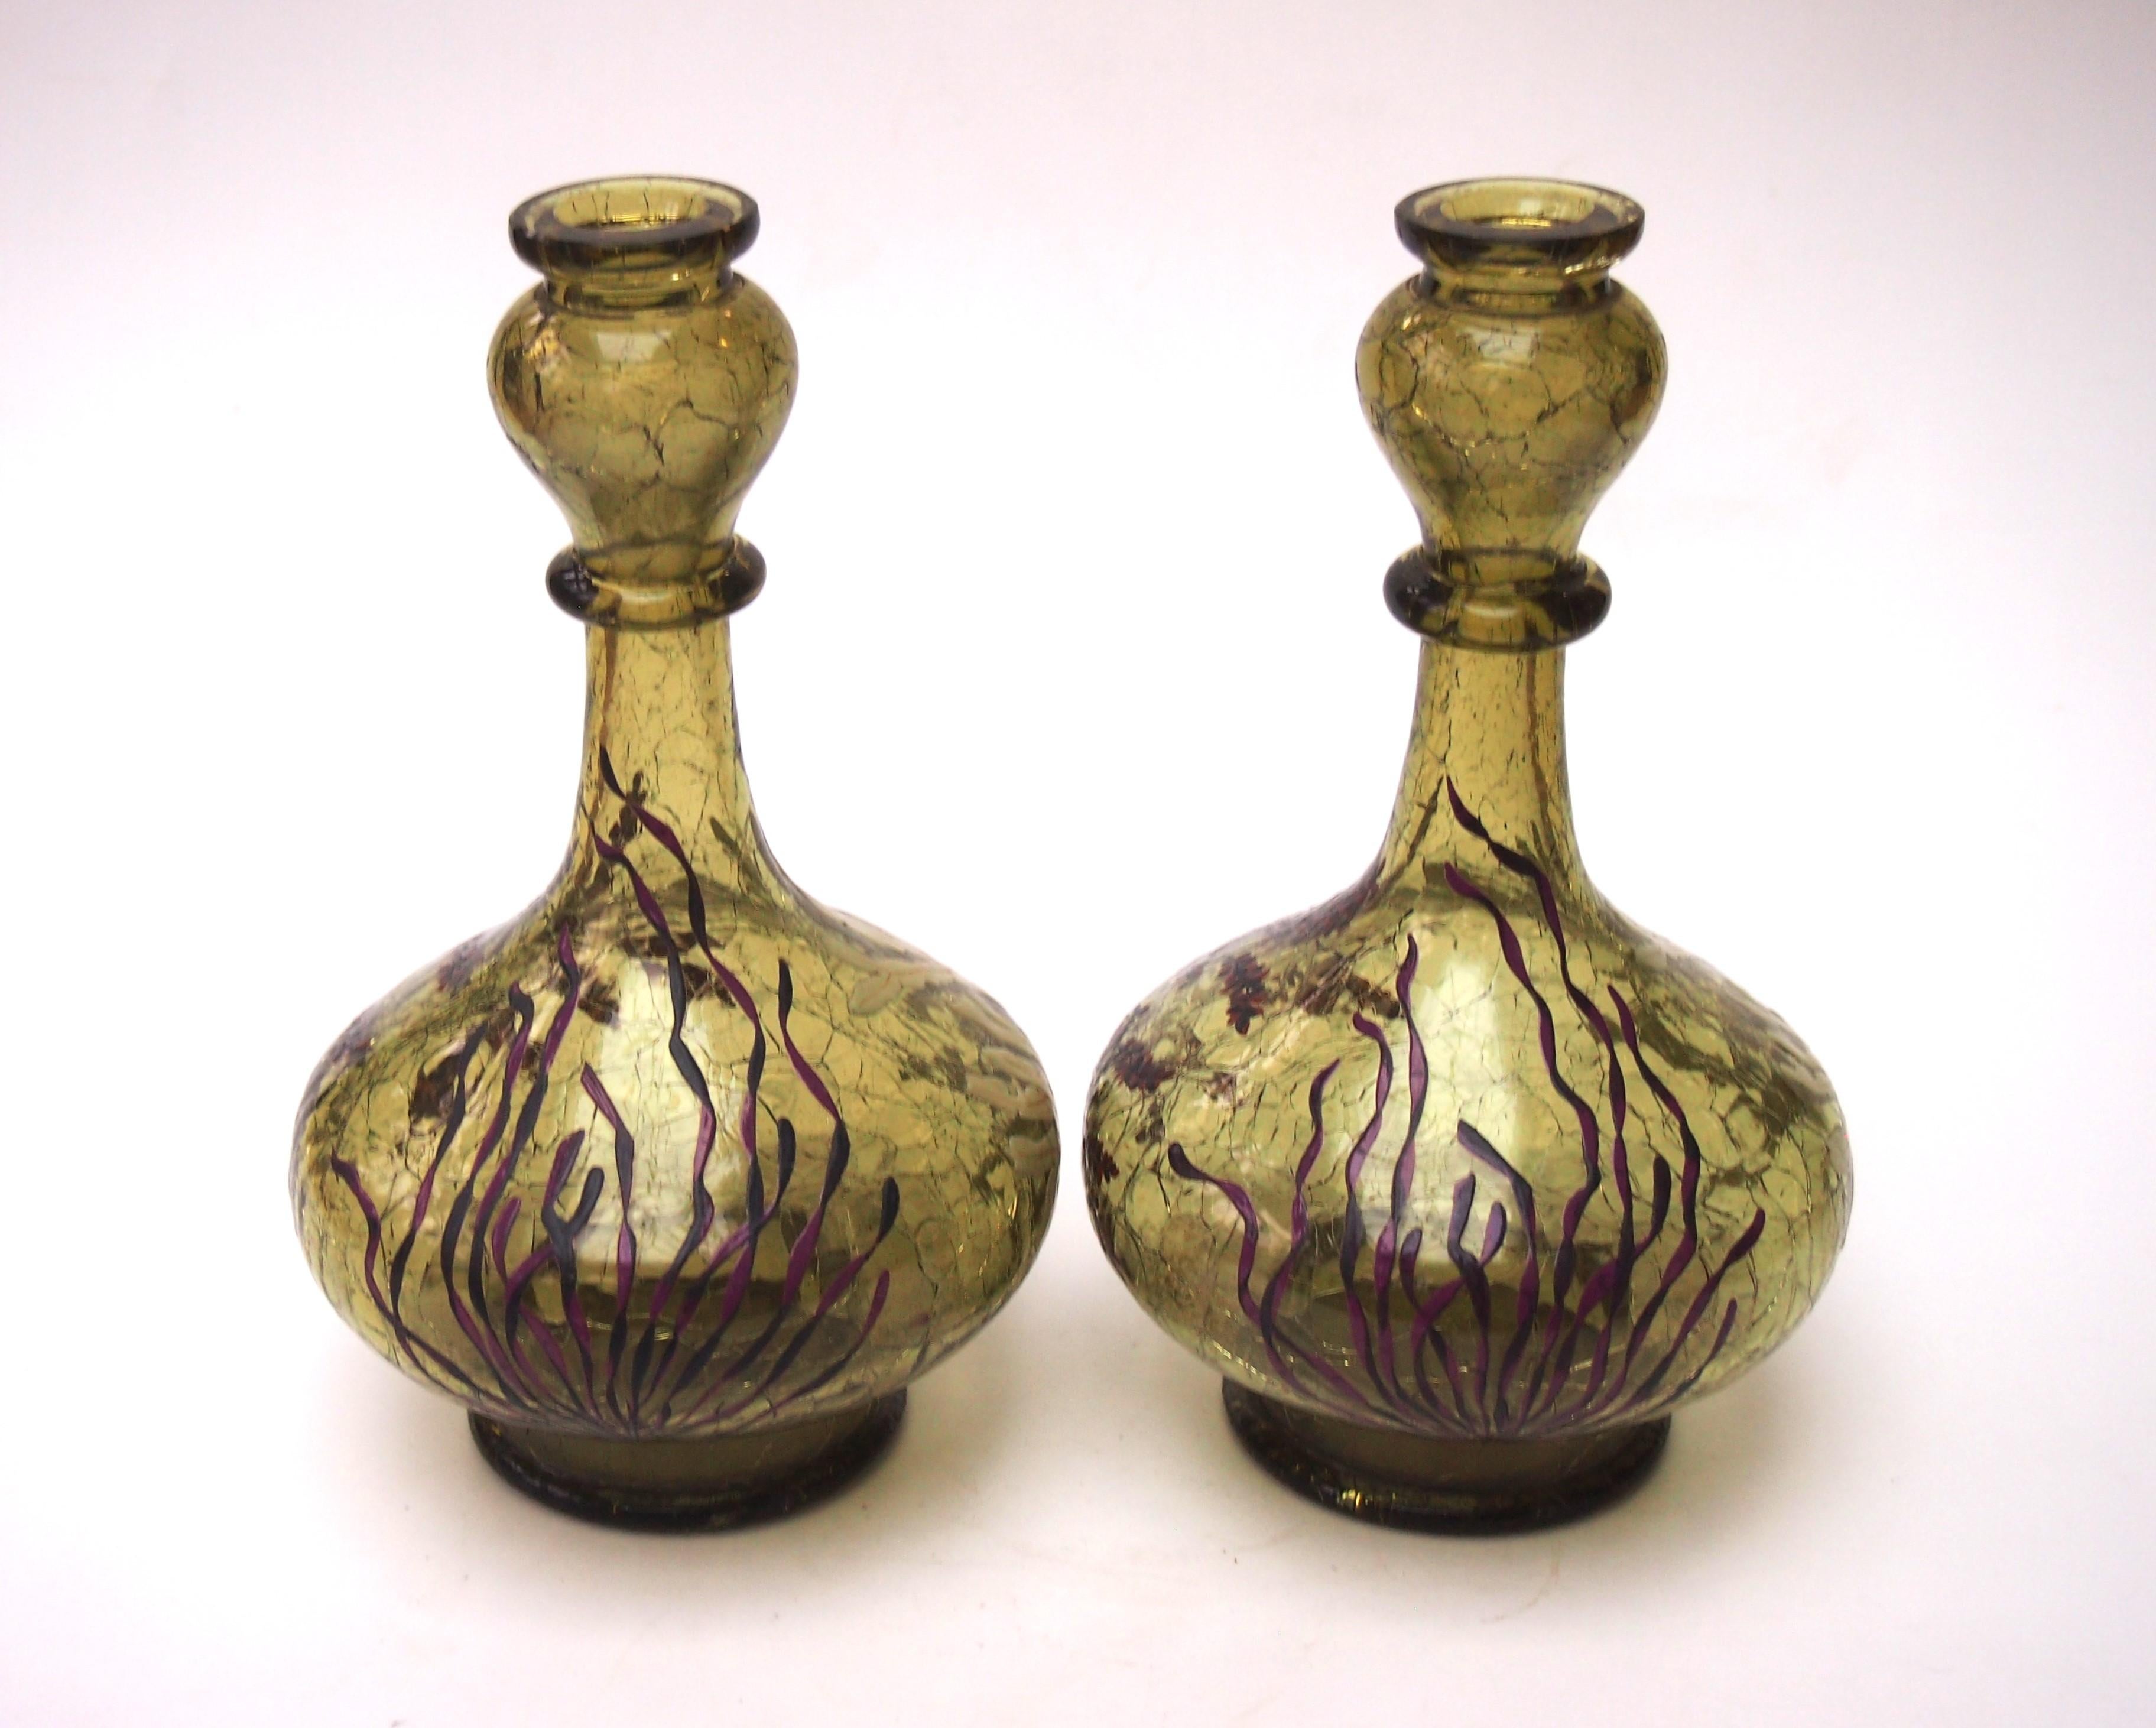 Czech Early Bohemian Pair of Crackle Glass Aquatic Enamelled Vases c1885